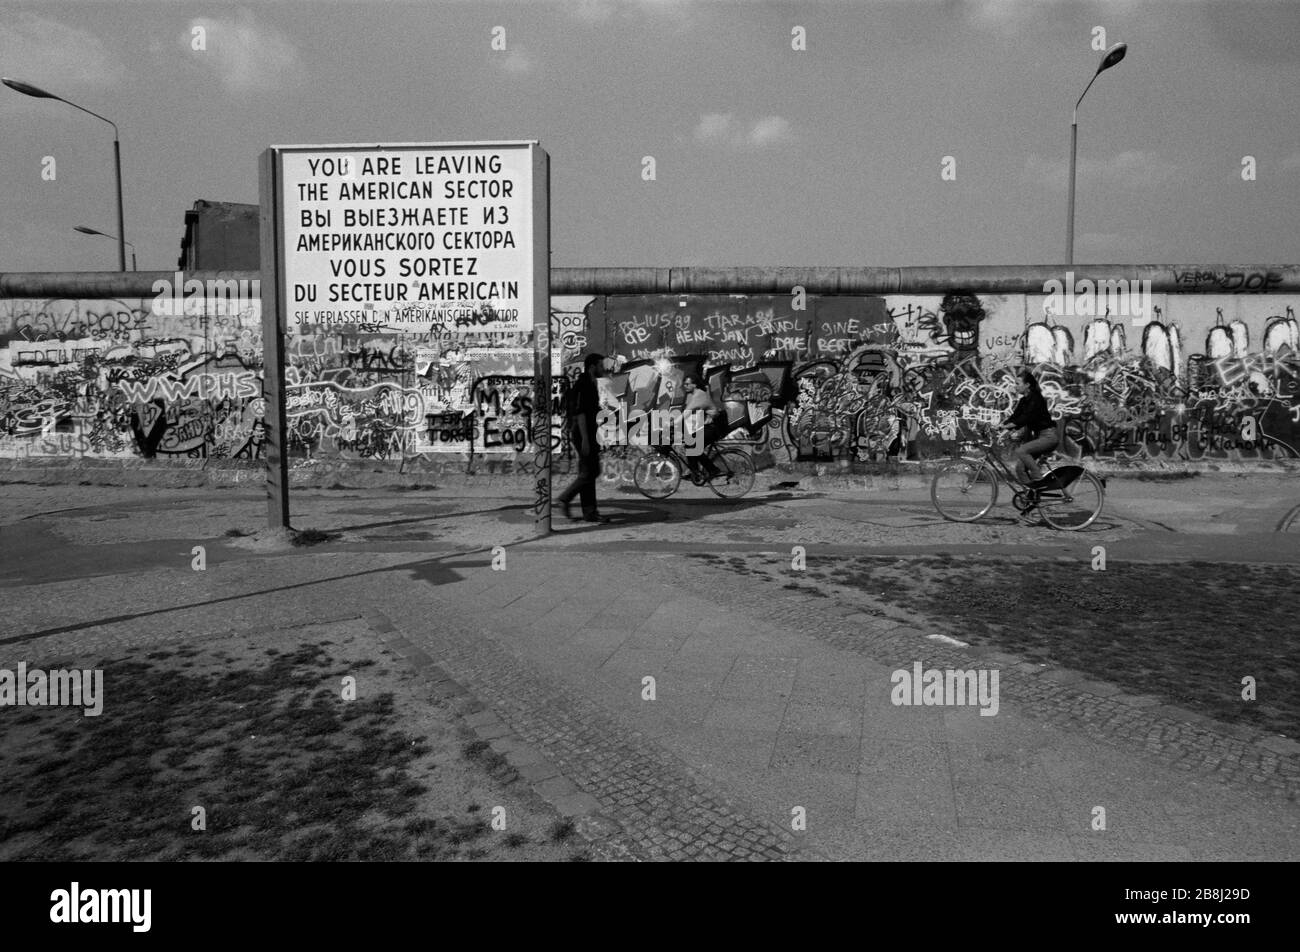 A sign indicating the end of the American sector next to the Berlin Wall at Potsdamer Platz, West Berlin. The Berlin Wall was a barrier constructed by the German Democratic Republic (GDR, East Germany) starting on 13 August 1961, that completely cut off West Berlin from surrounding East Germany and from East Berlin. The Wall was opened on 9. November 1989 allowing free movement of people from east to west. Stock Photo